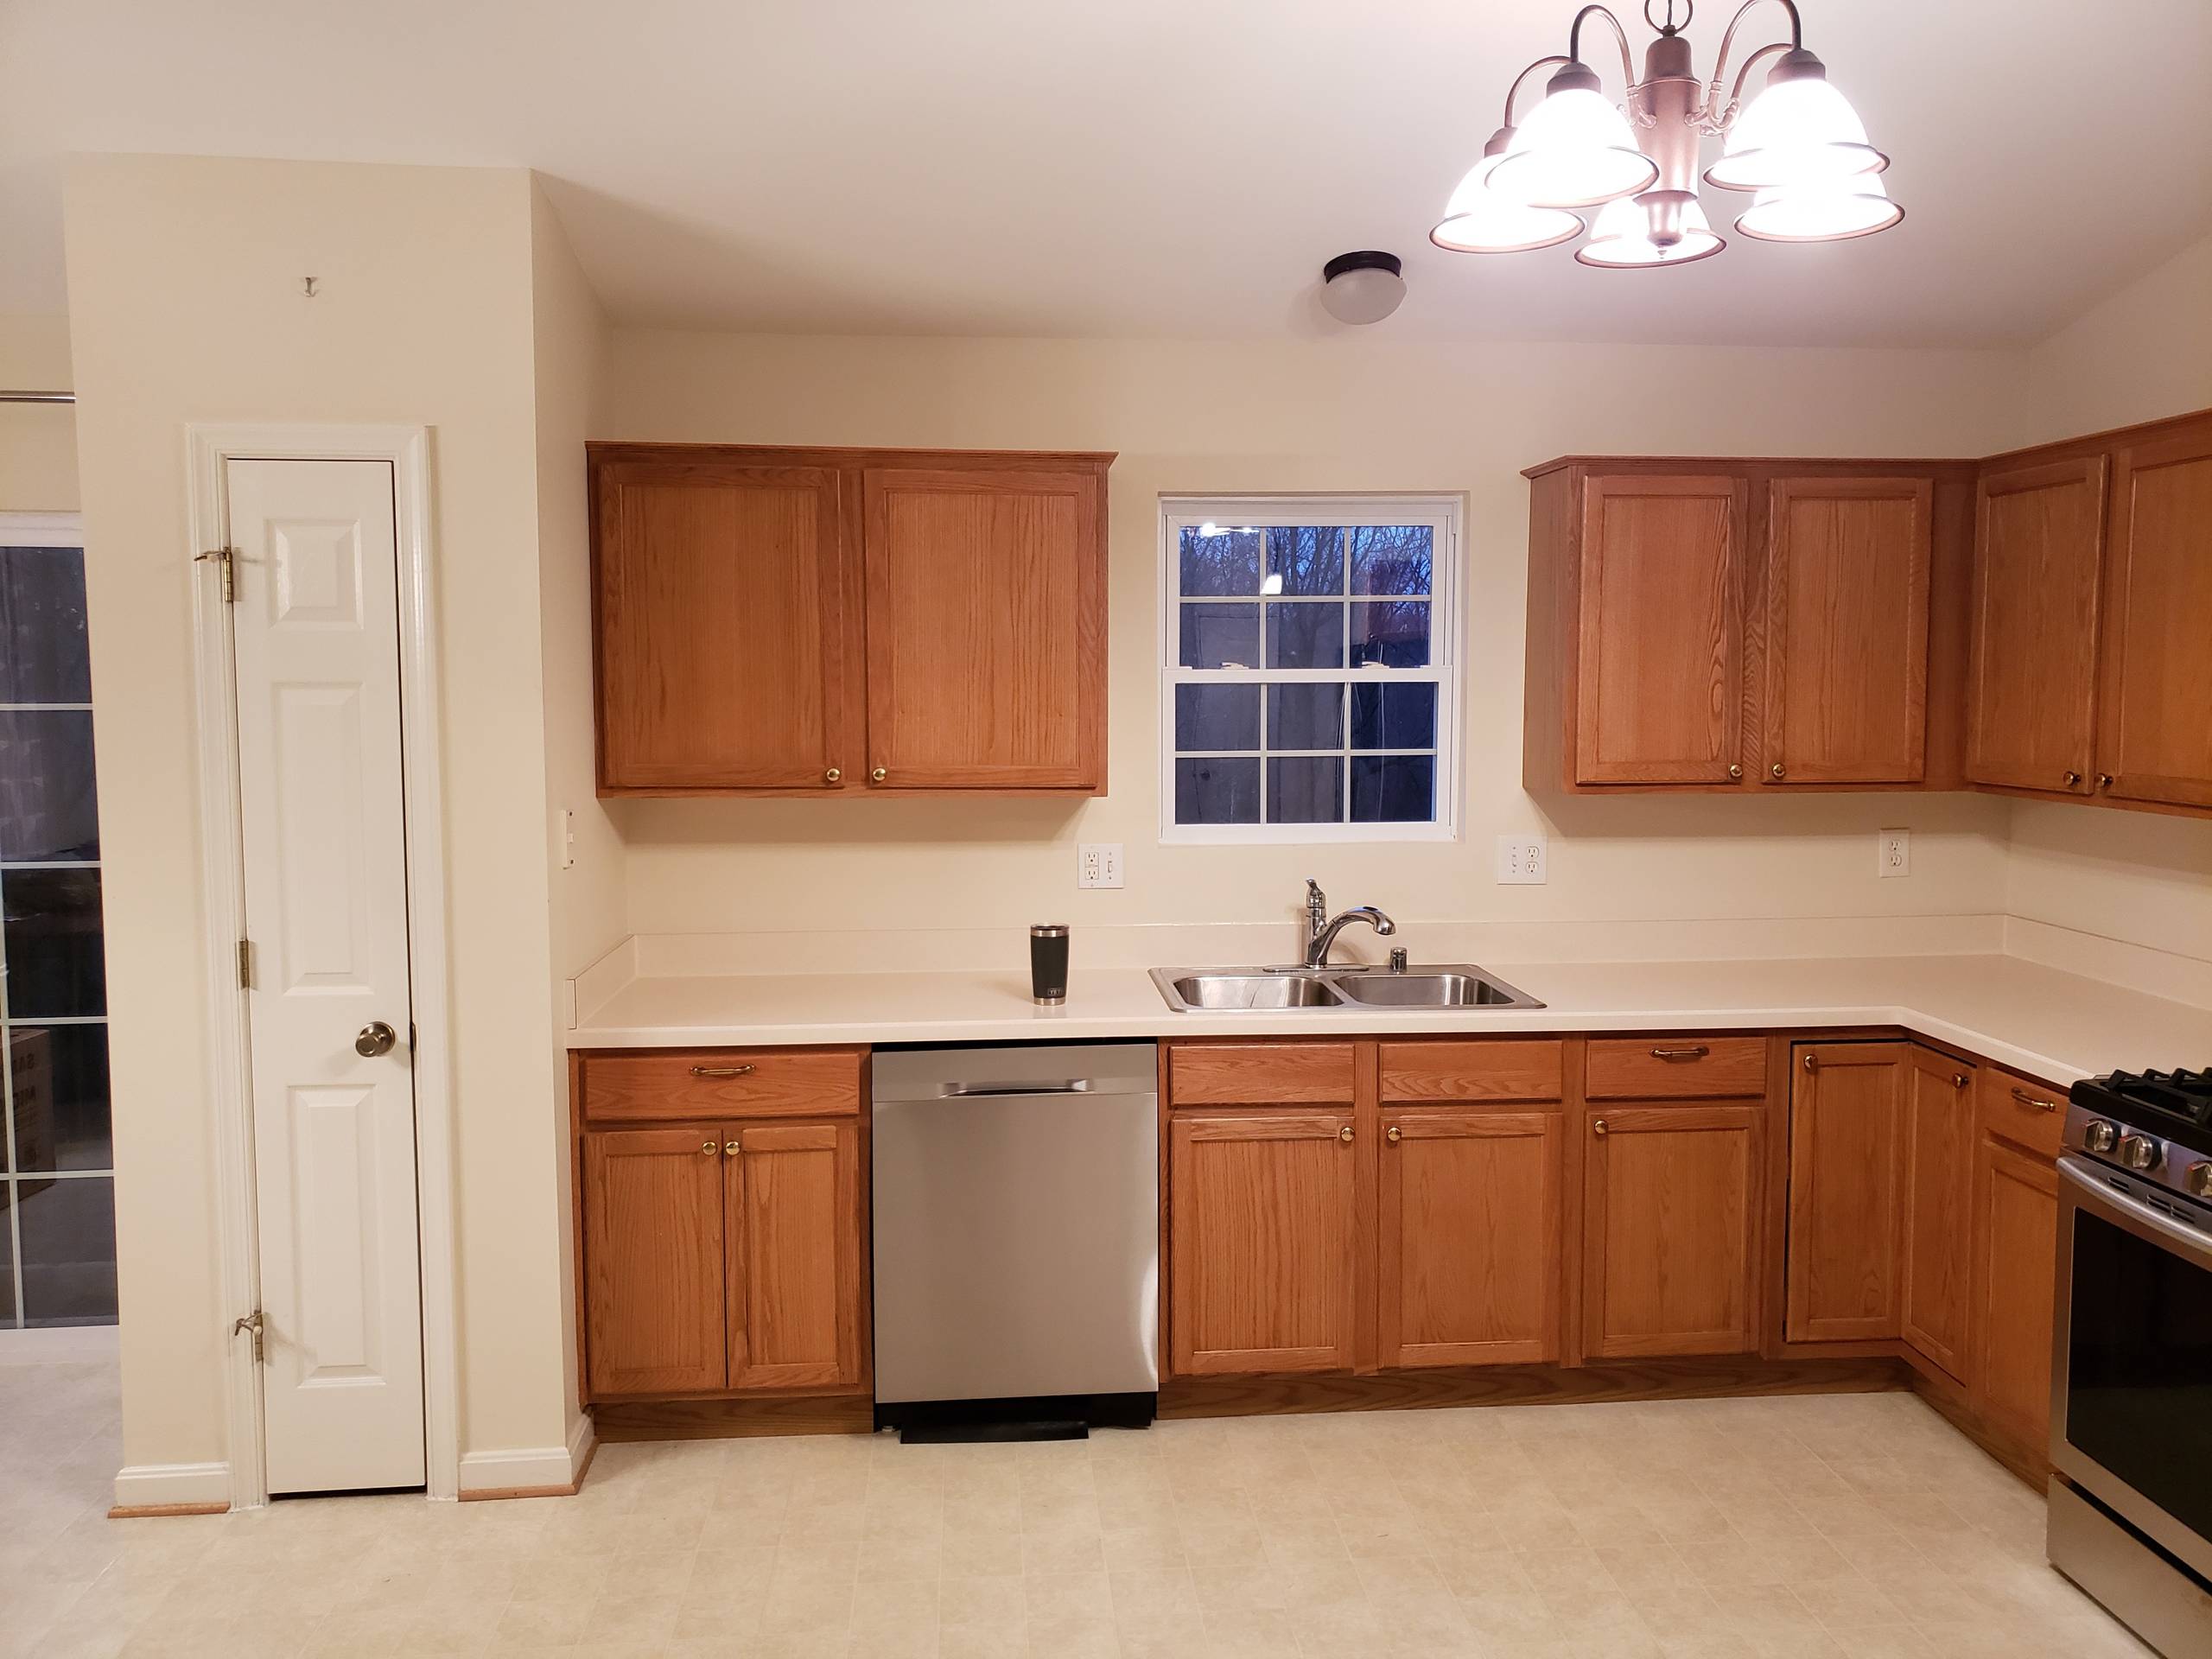 Before Pictures of this Complete Kitchen Remodel - Very Happy Customer!